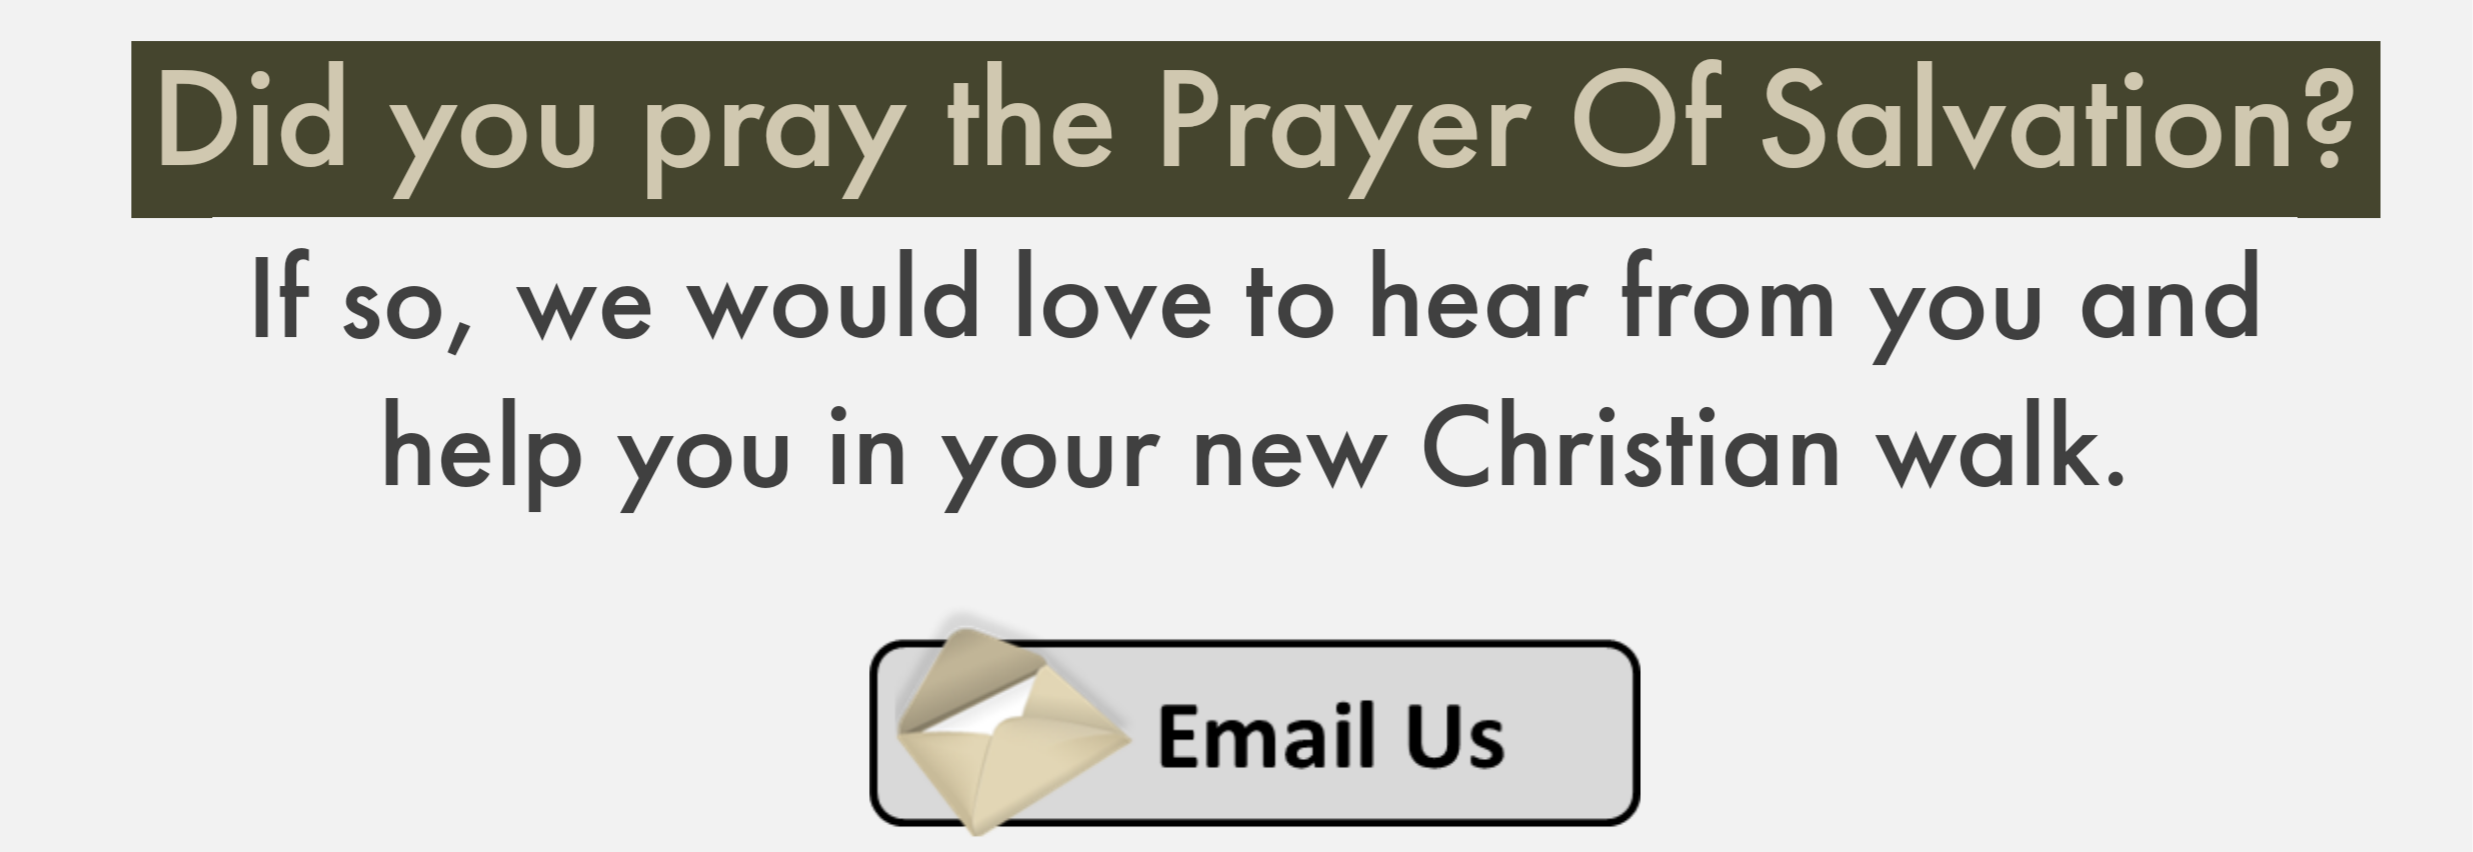 image-950604-Salvation_prayer_email-aab32.png